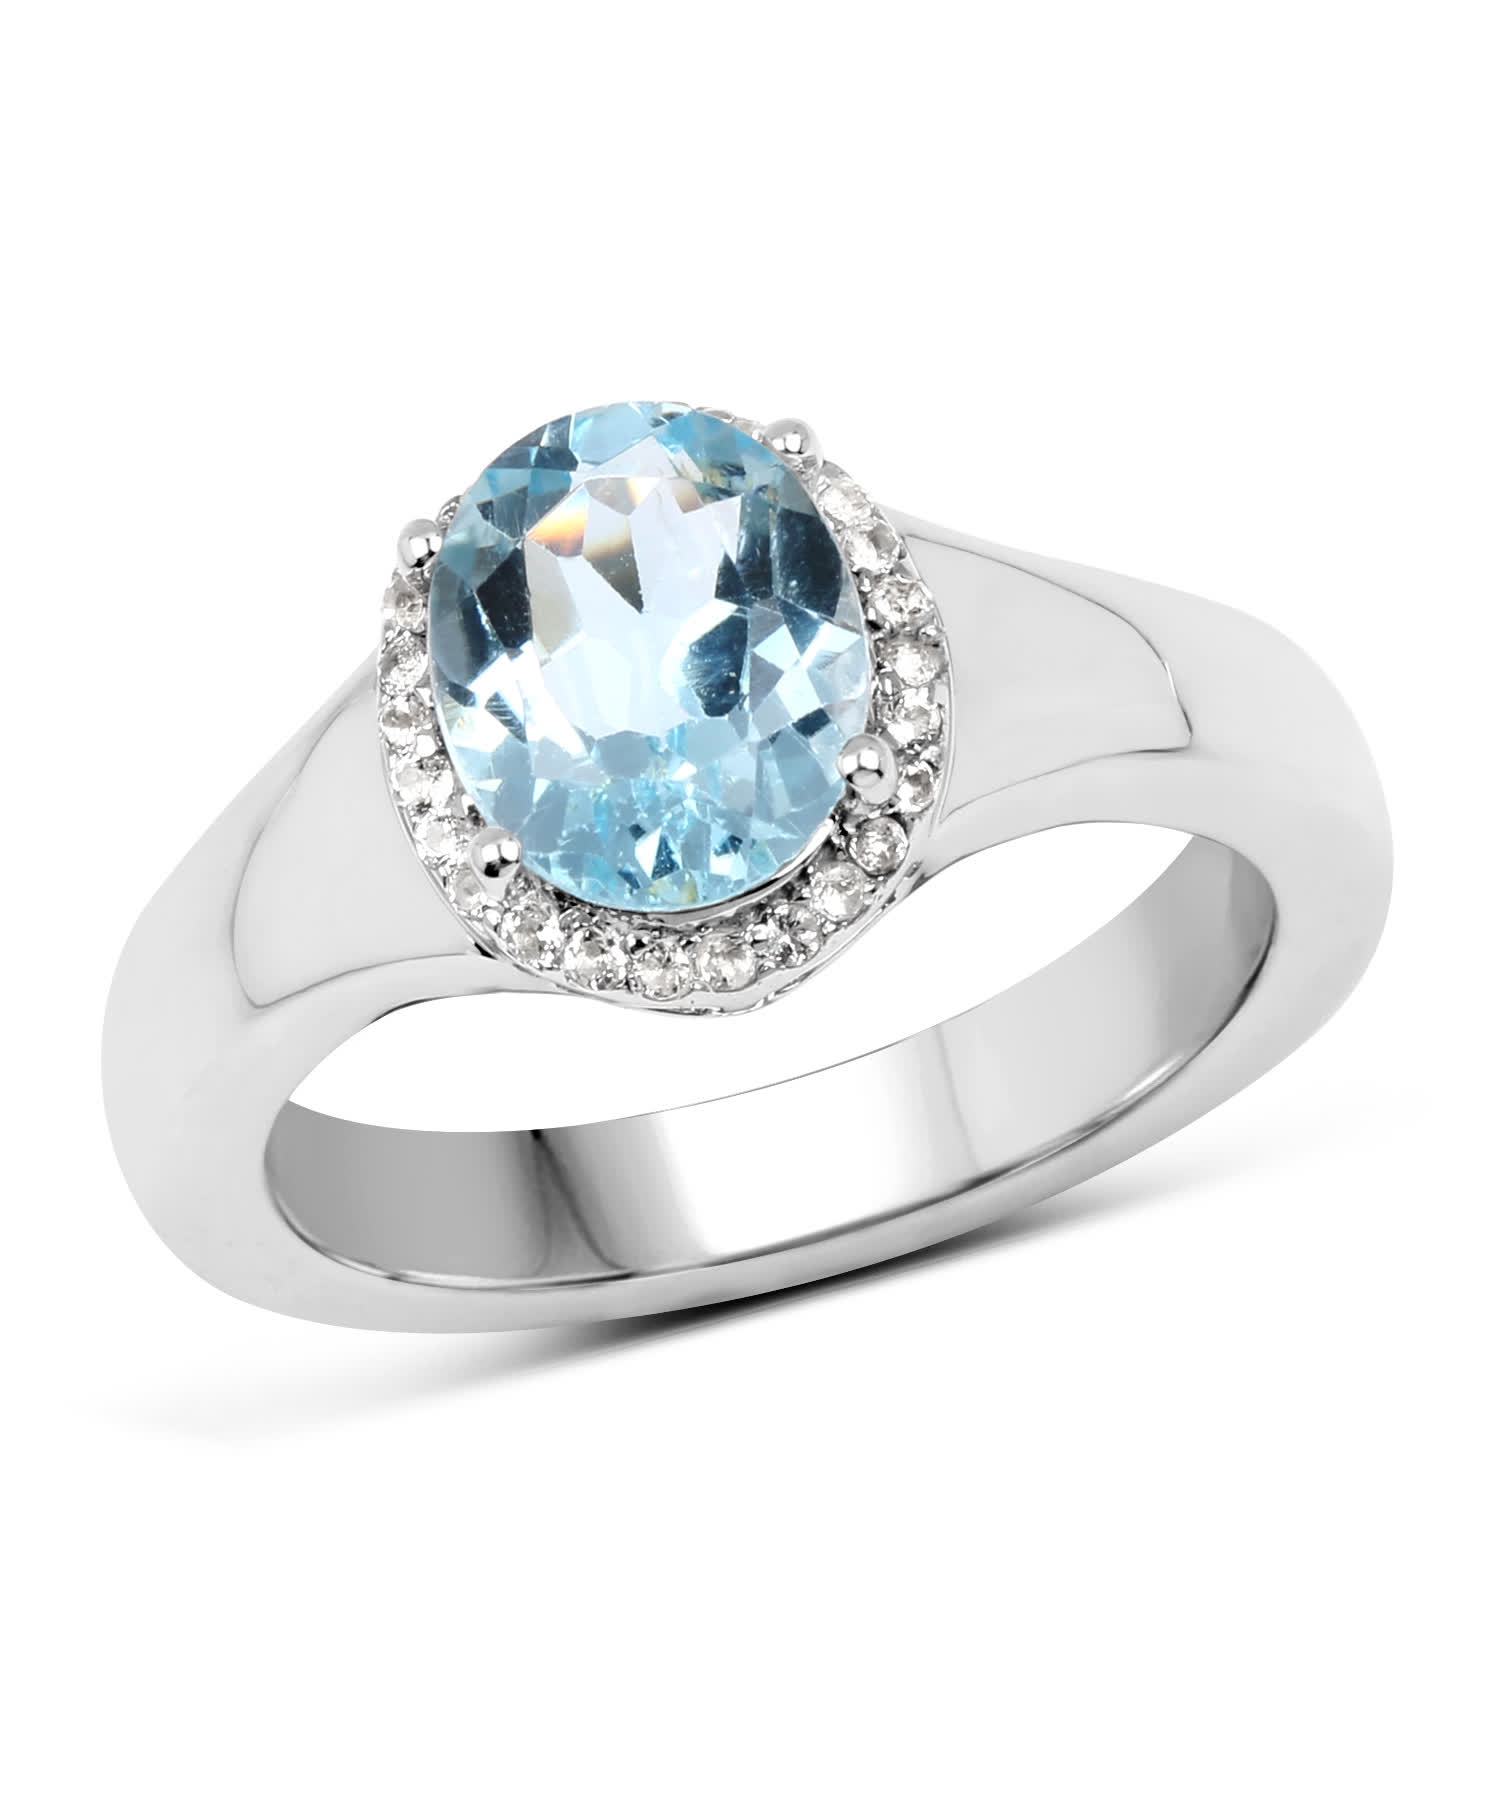 2.63ctw Natural Sky Blue Topaz Rhodium Plated 925 Sterling Silver Ring View 1